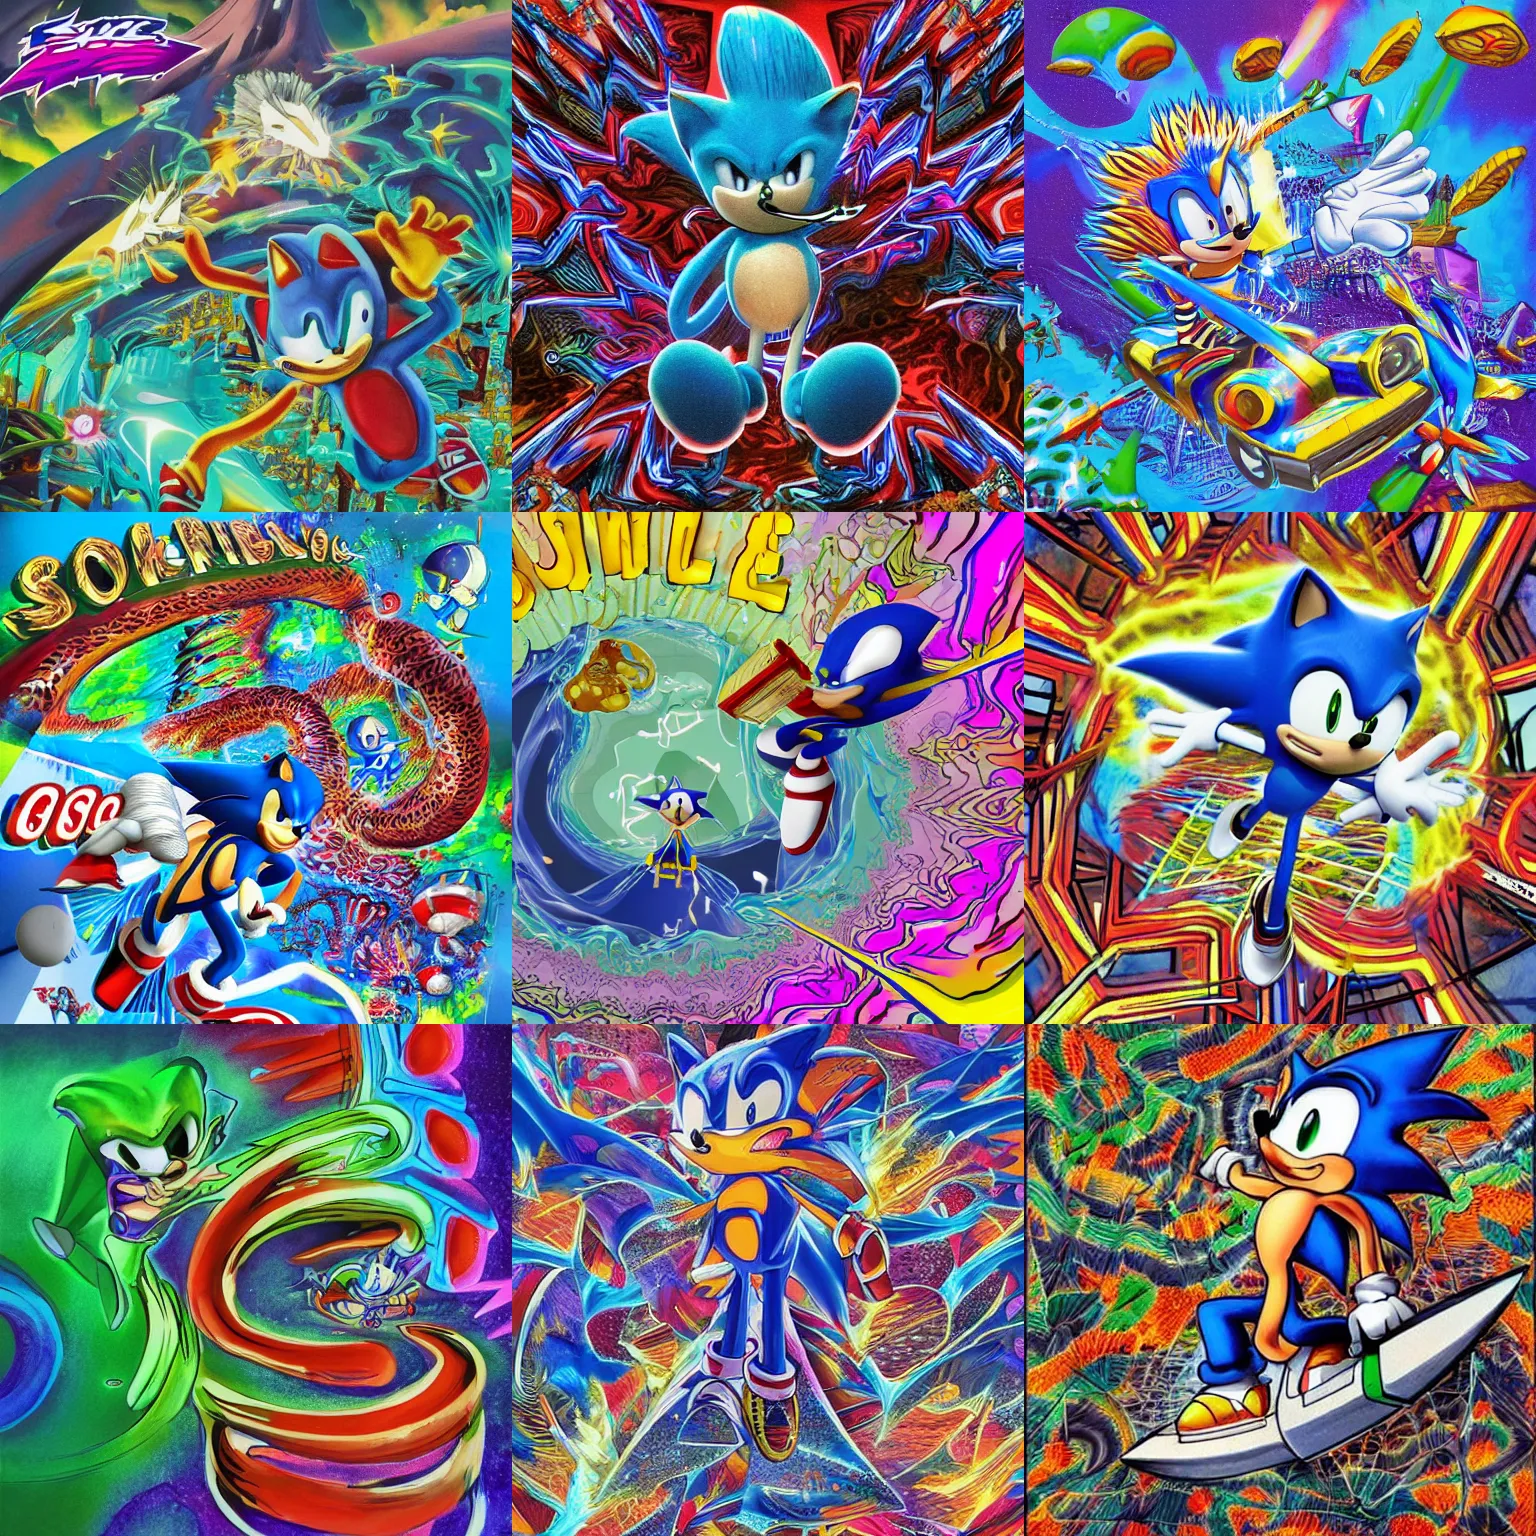 Prompt: sonic in a surreal, sharp, detailed professional, high quality airbrush art MGMT album cover of a liquid dissolving LSD DMT blue sonic the hedgehog surfing through cyberspace, mandelbrot pattern, 1990s 1992 Sega Genesis video game album cover